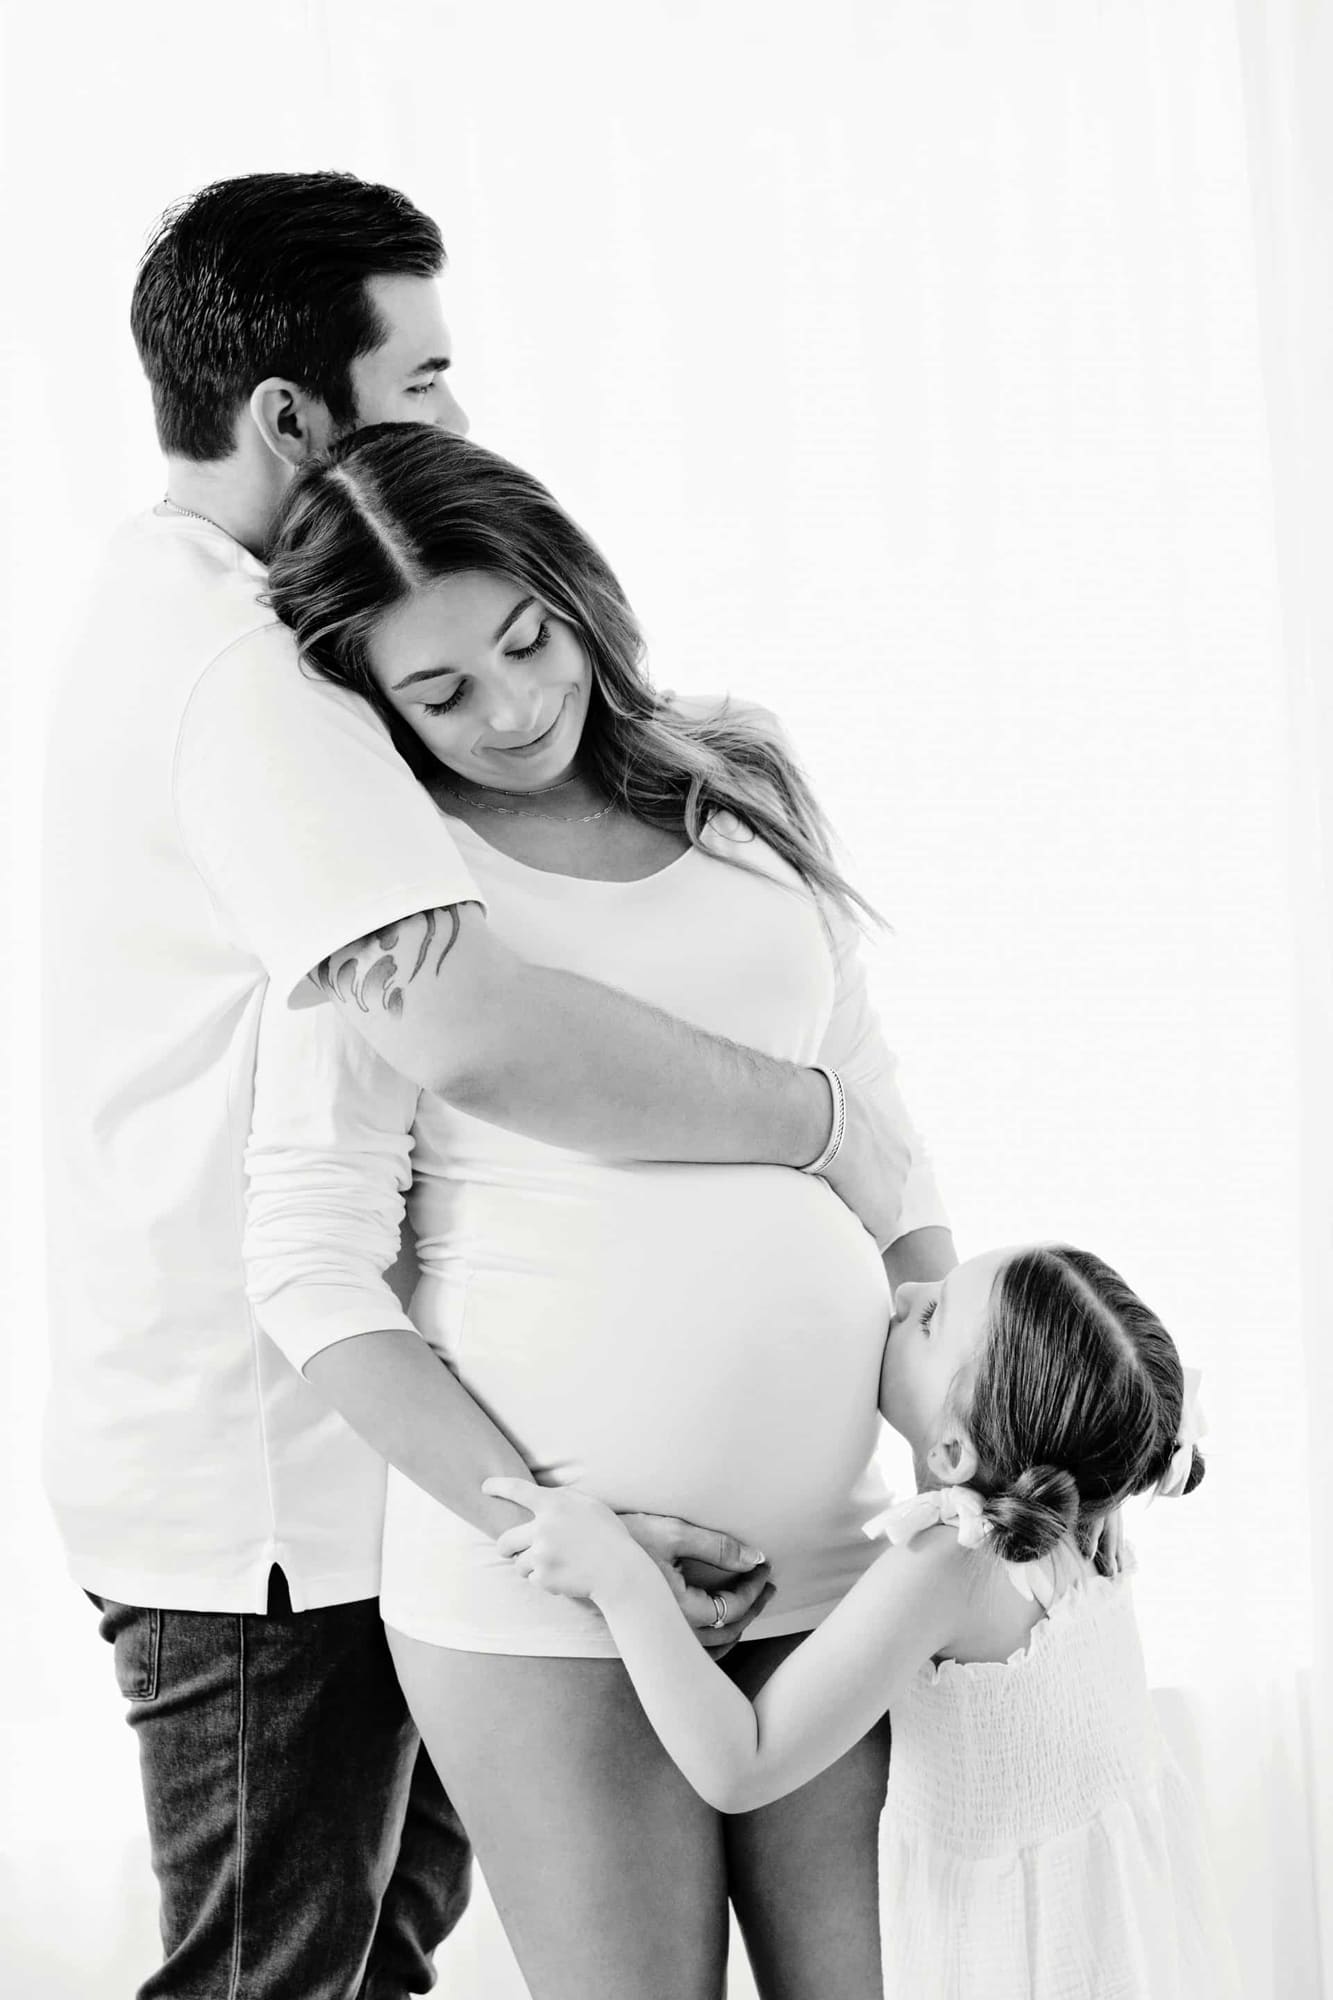 A family poses for a maternity photo.